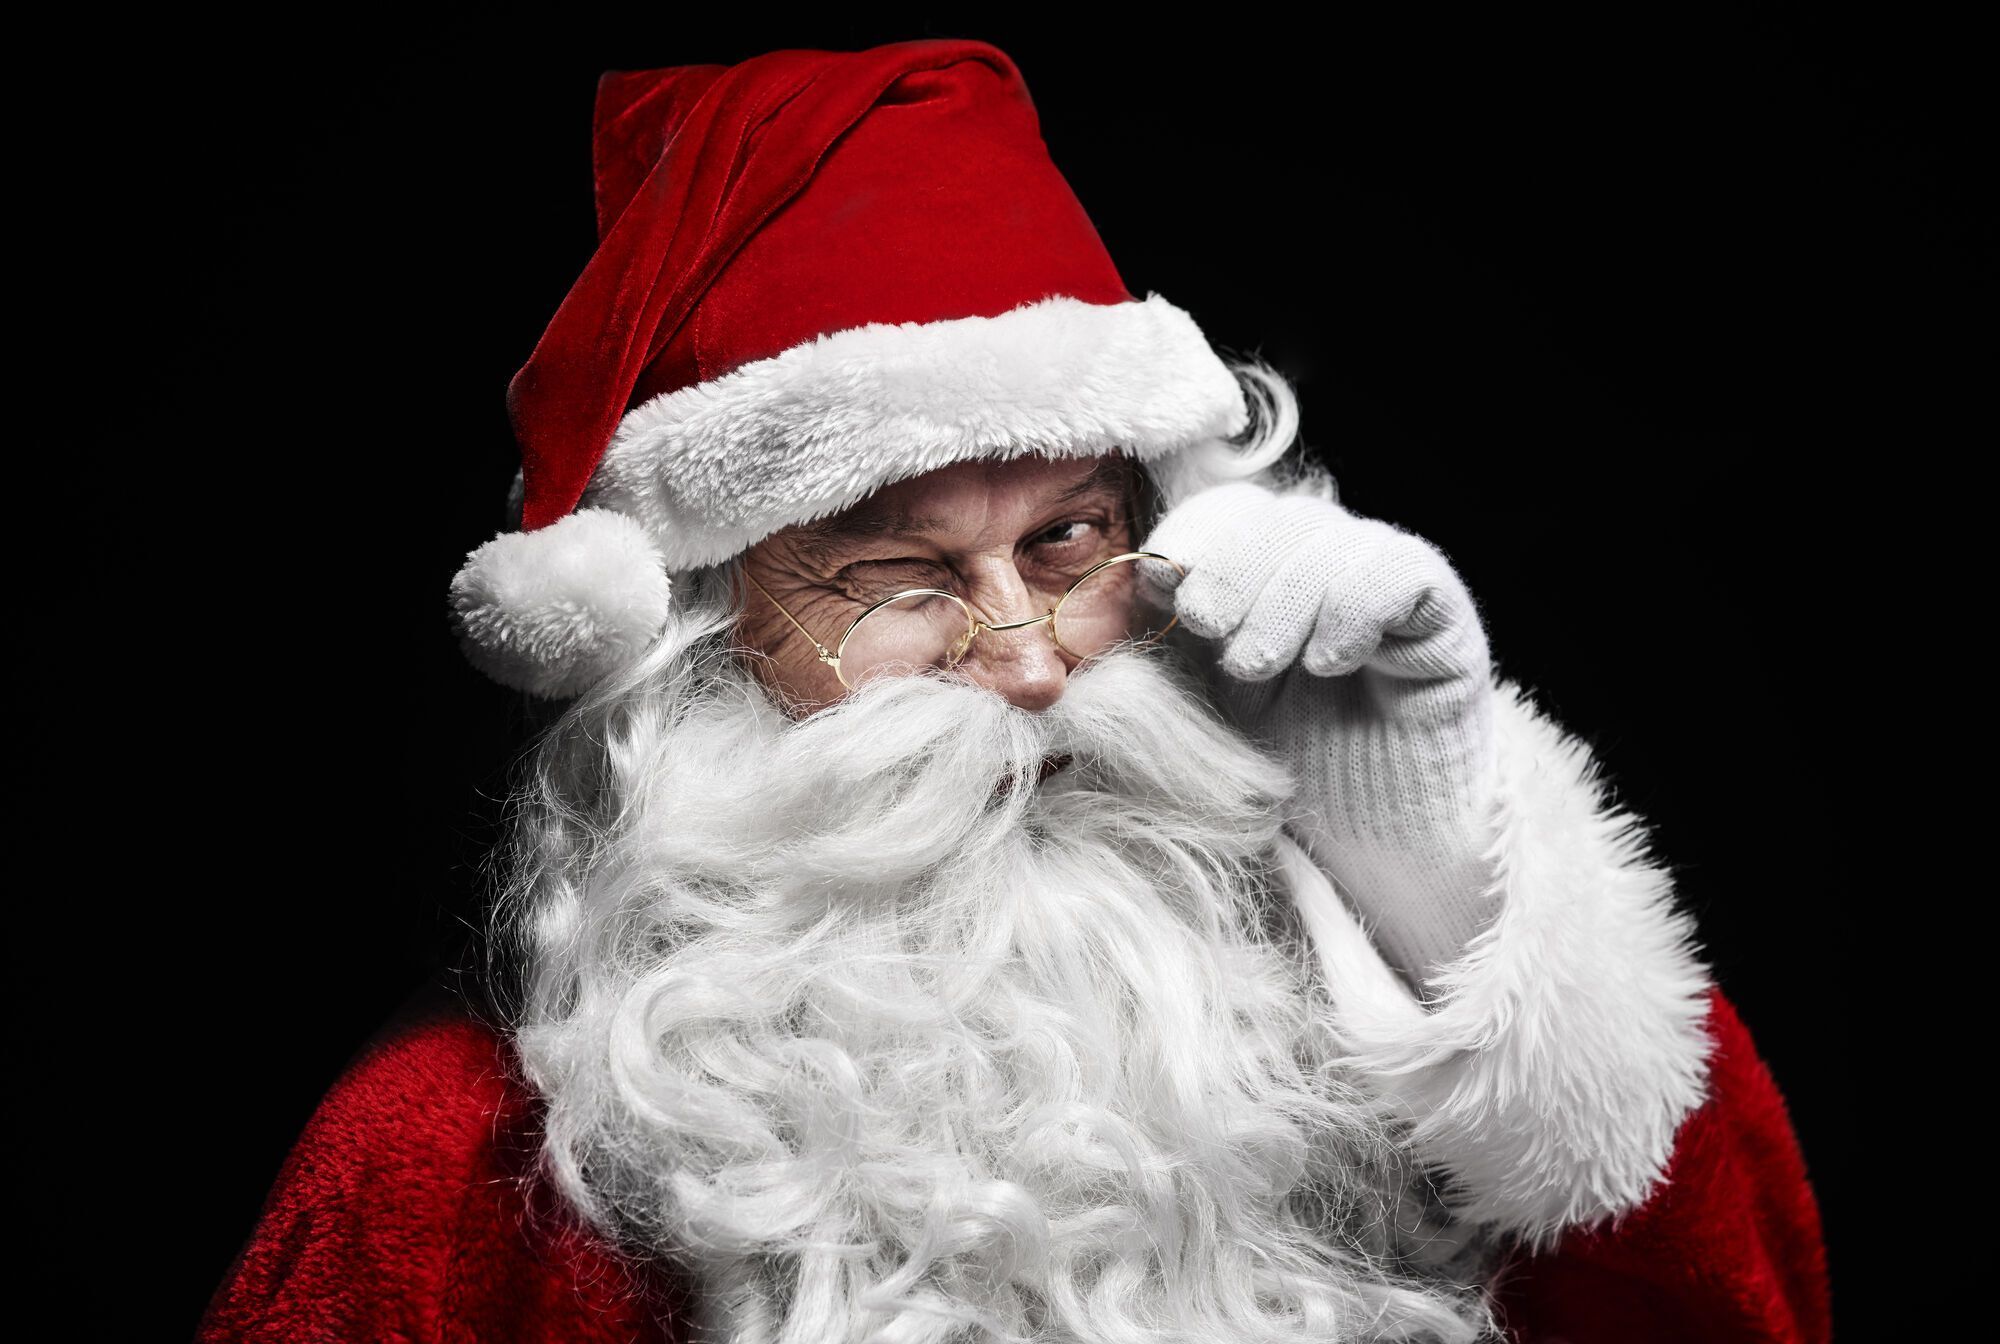 A teacher in England told her 6th grade students that Santa was not real. She was punished